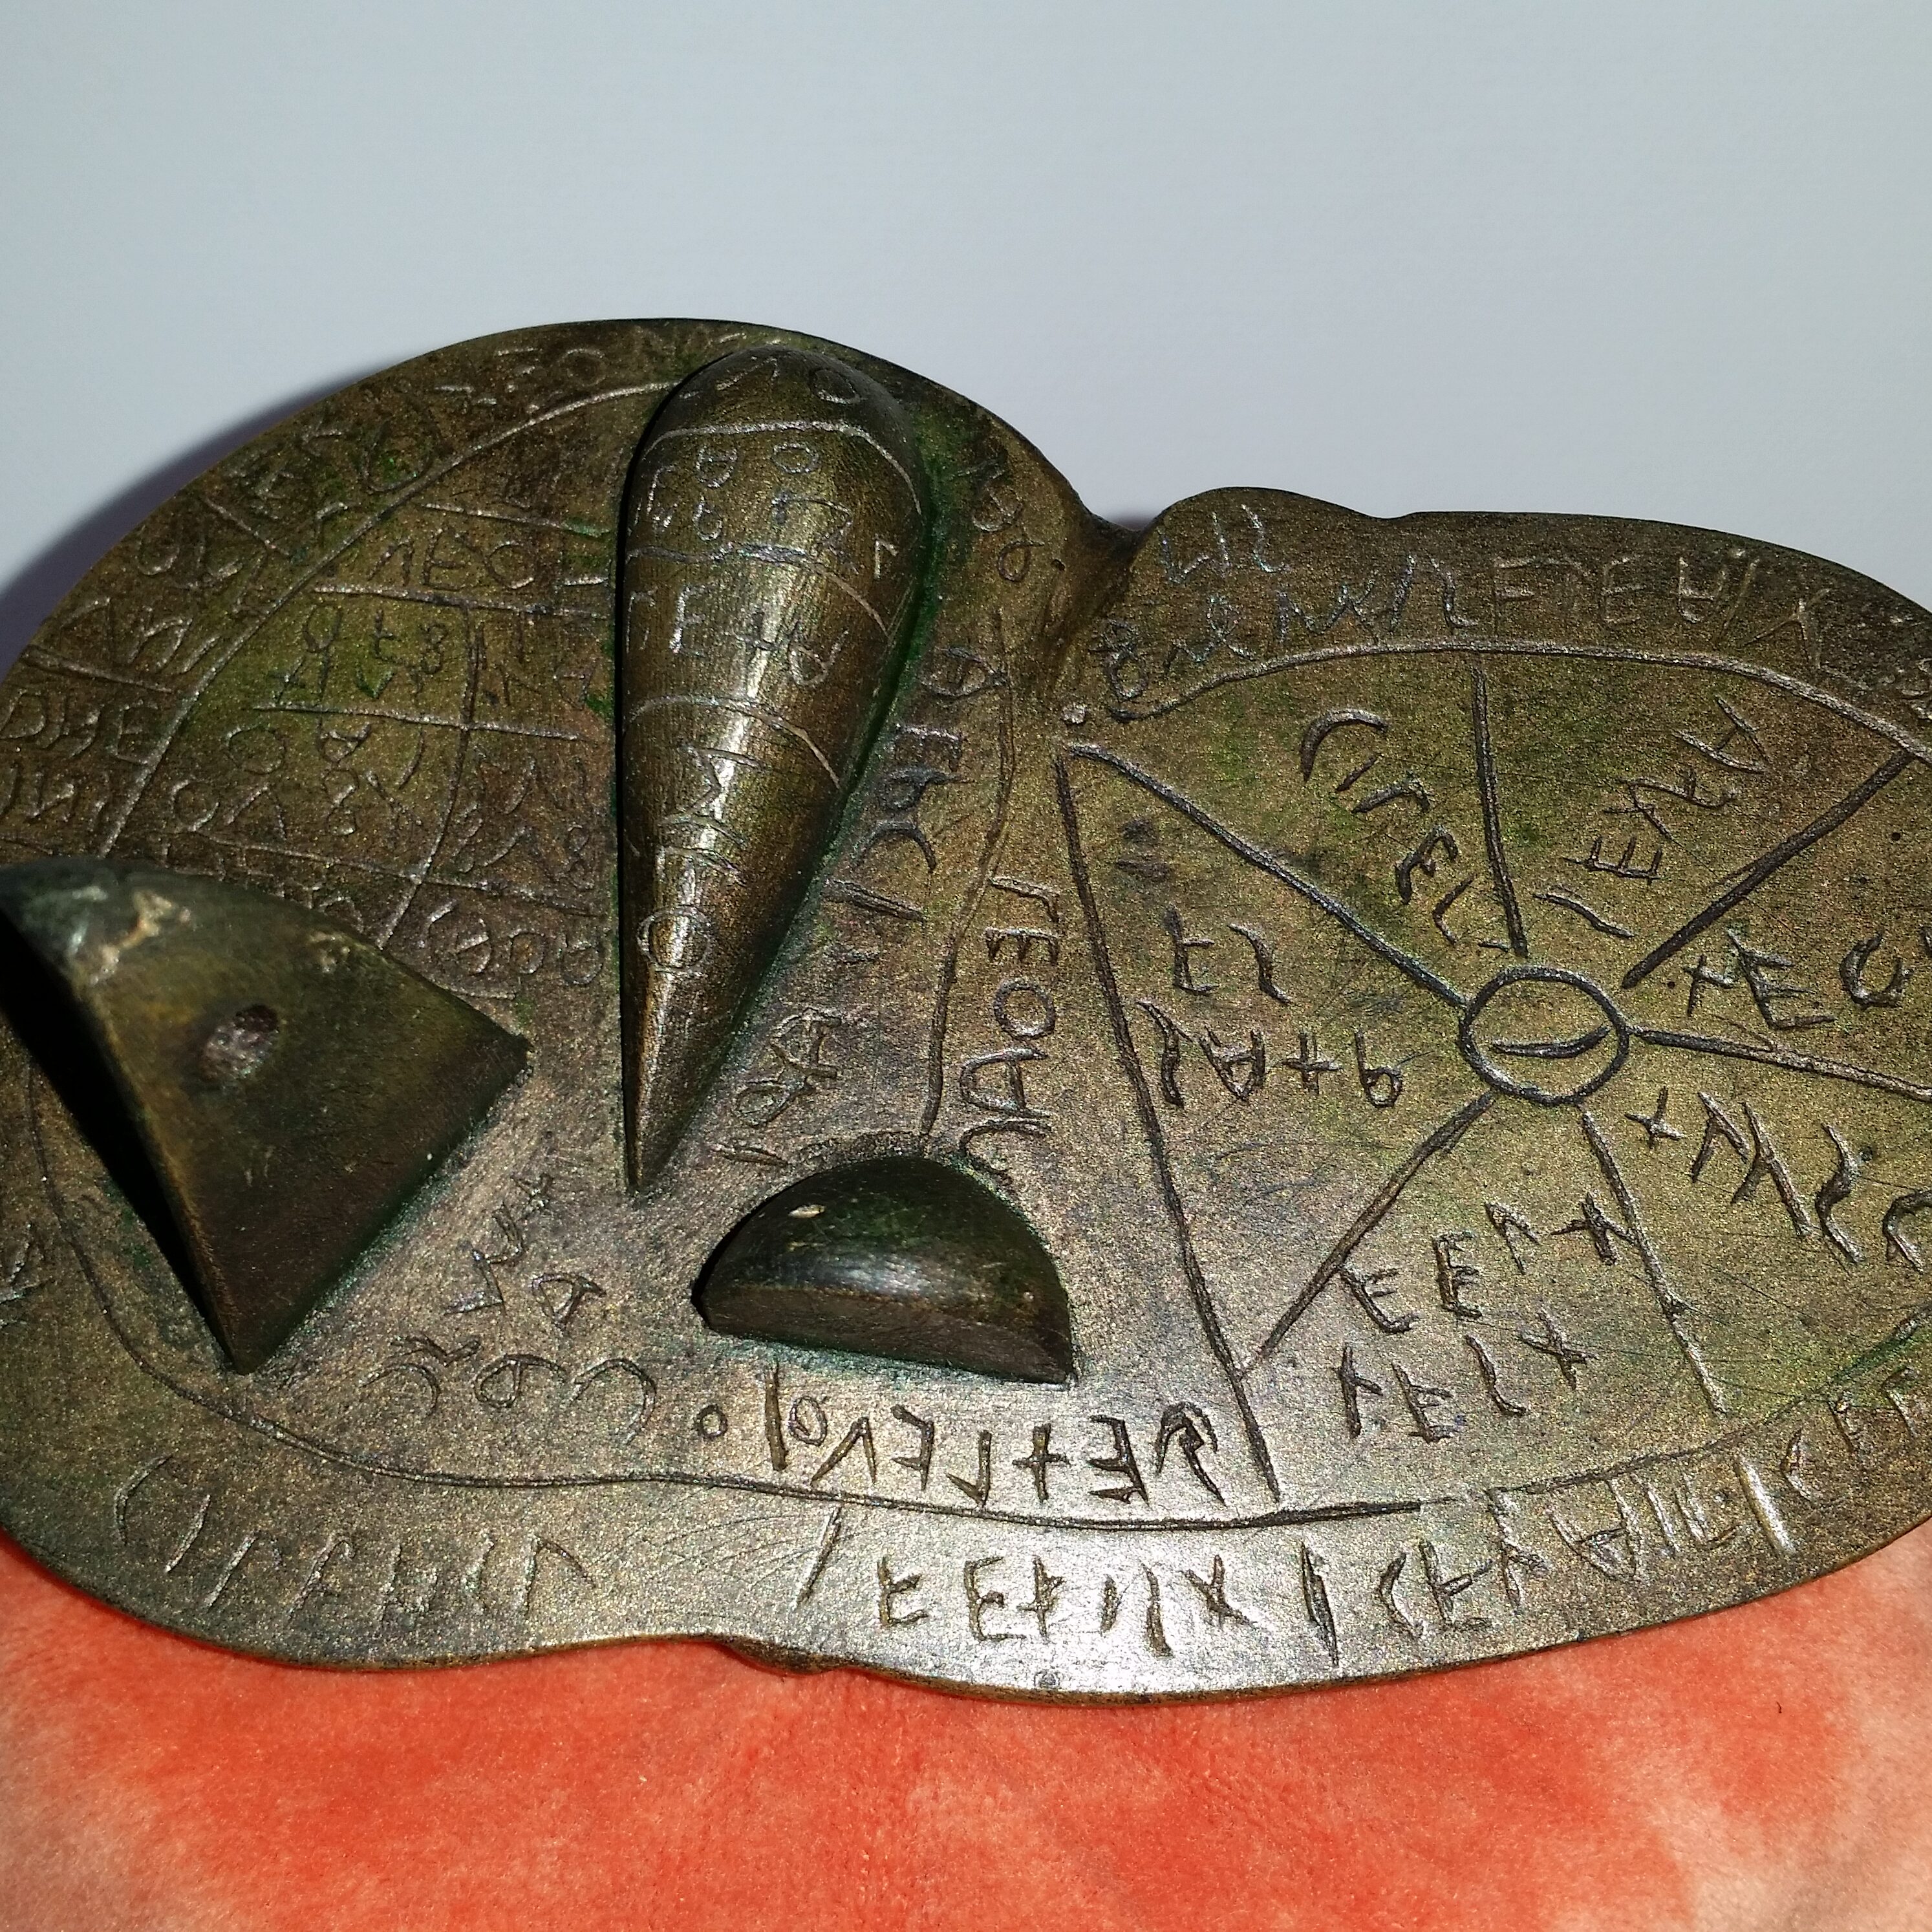 The Liver of Piacenza is a bronze sheep's liver dating back late 2nd century BC